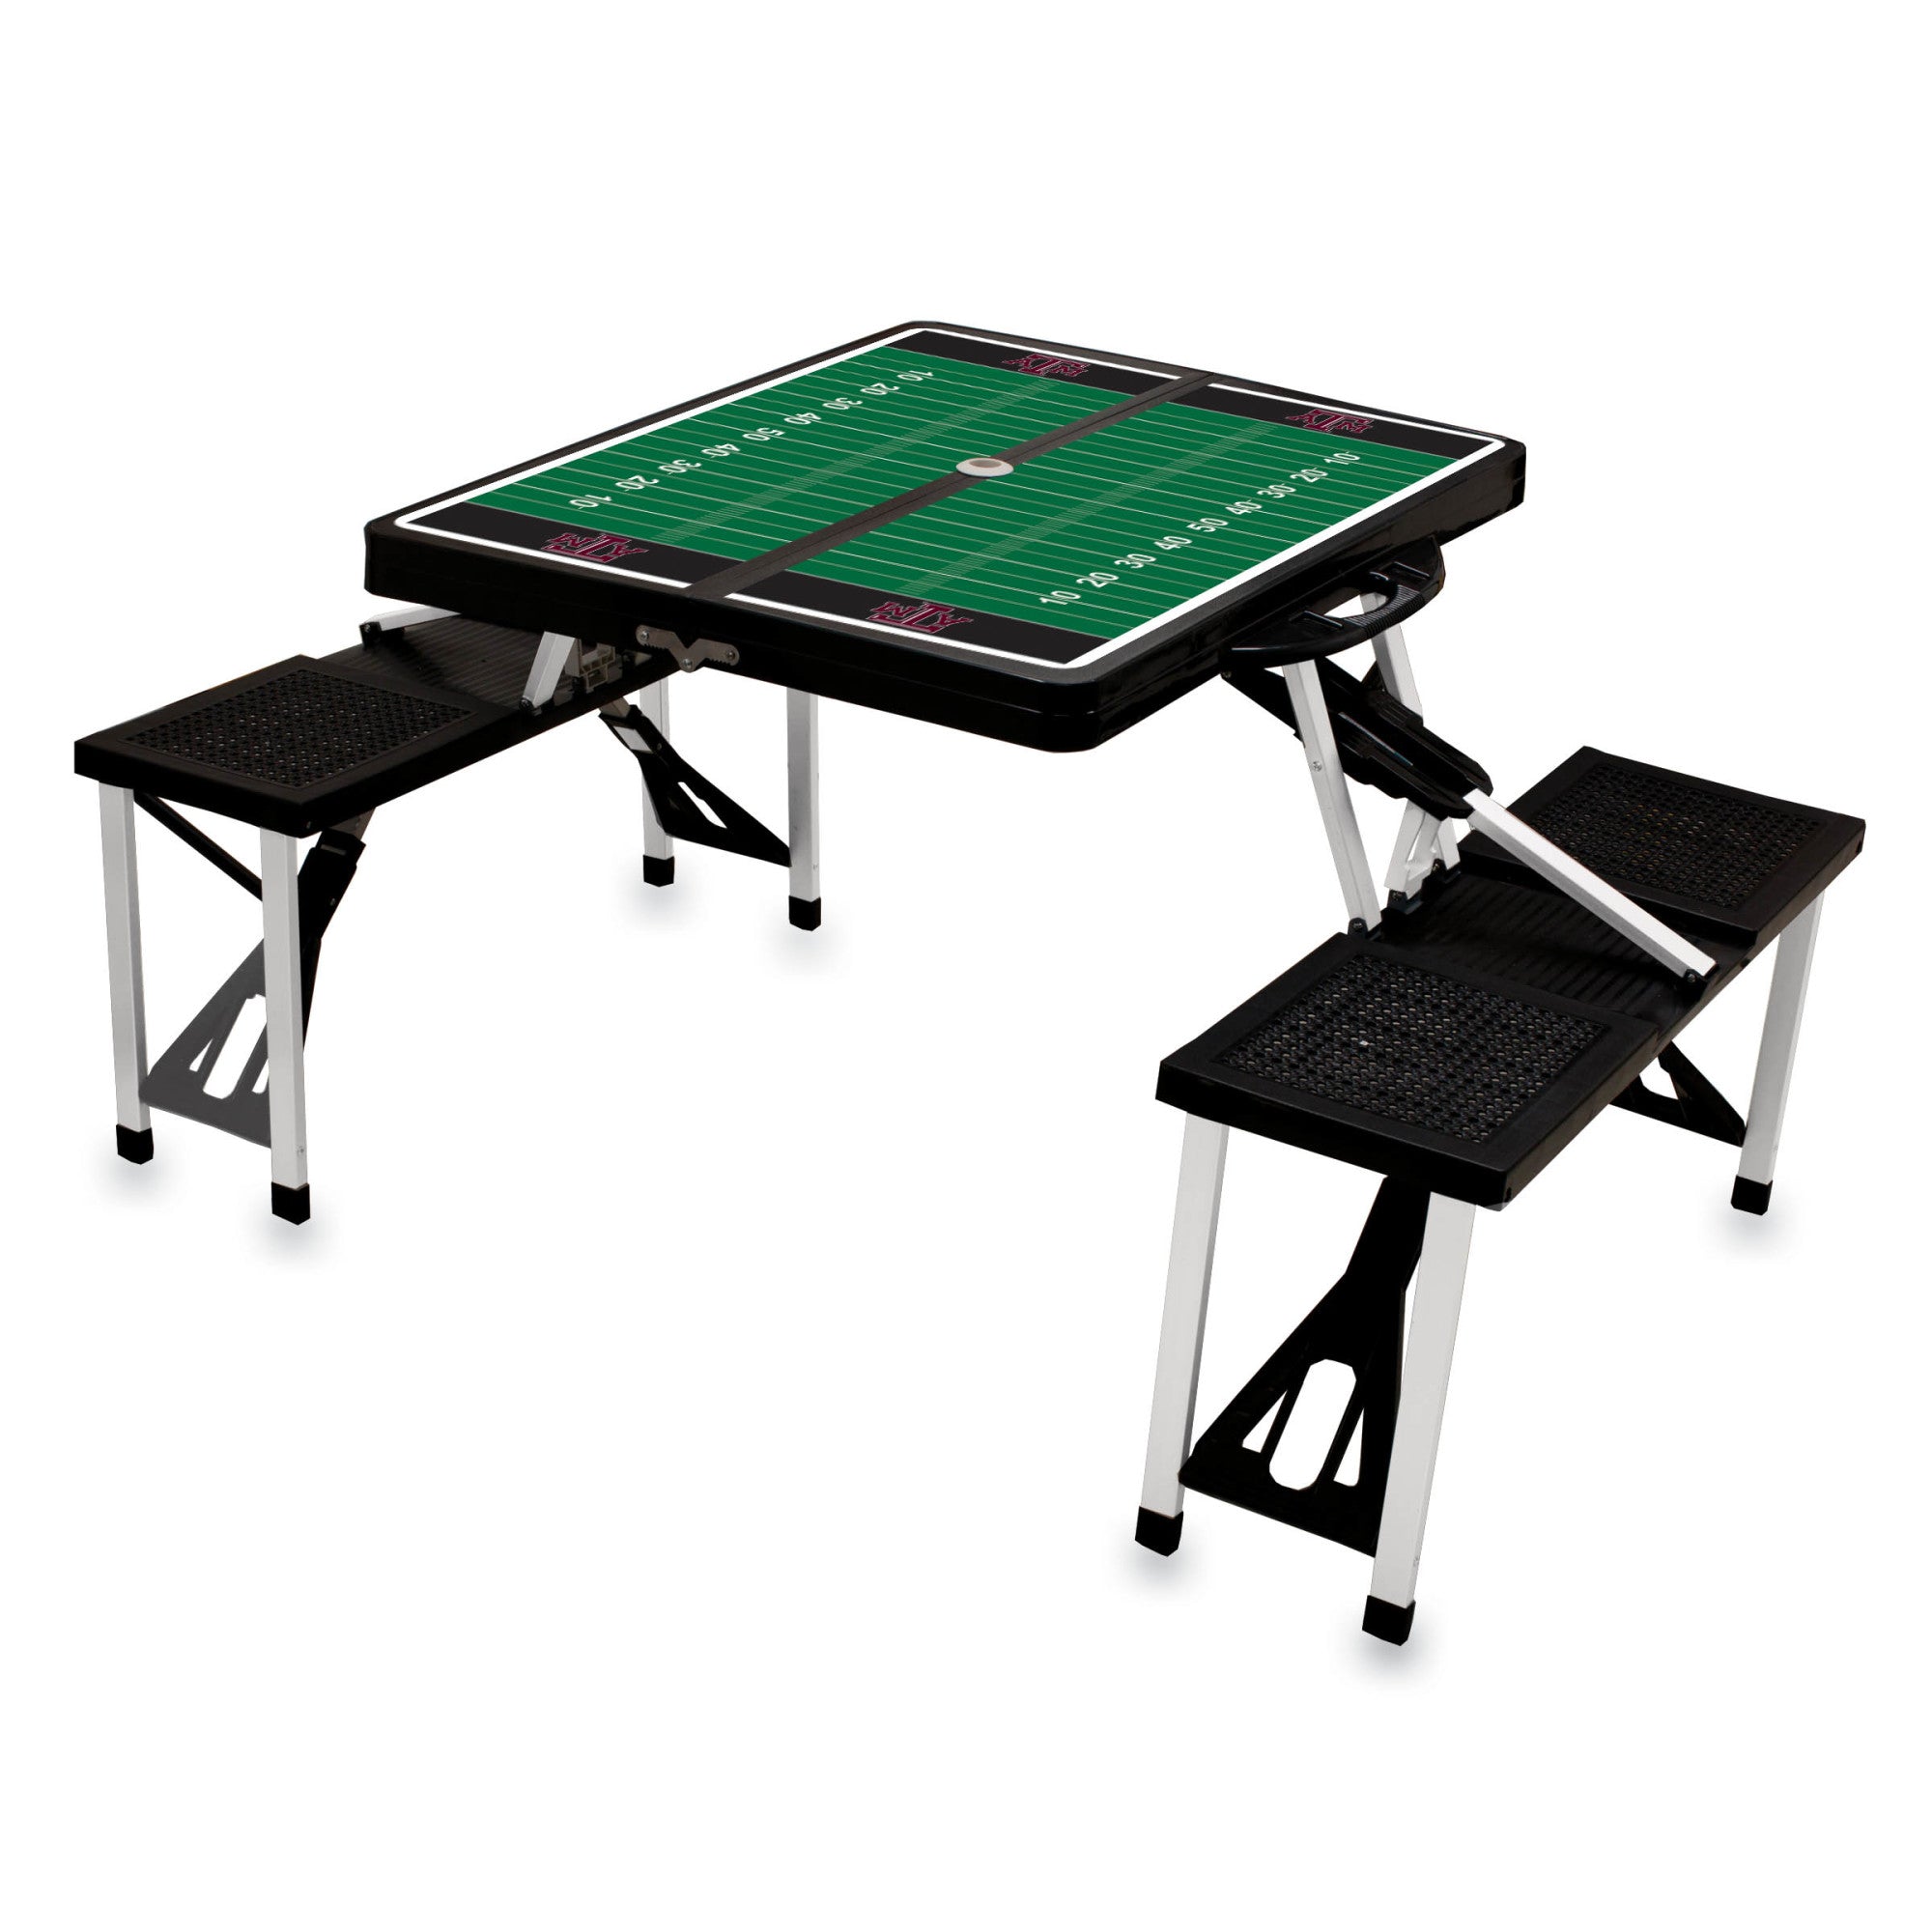 Outdoor Ping Pong Table - Save 20% Off Now